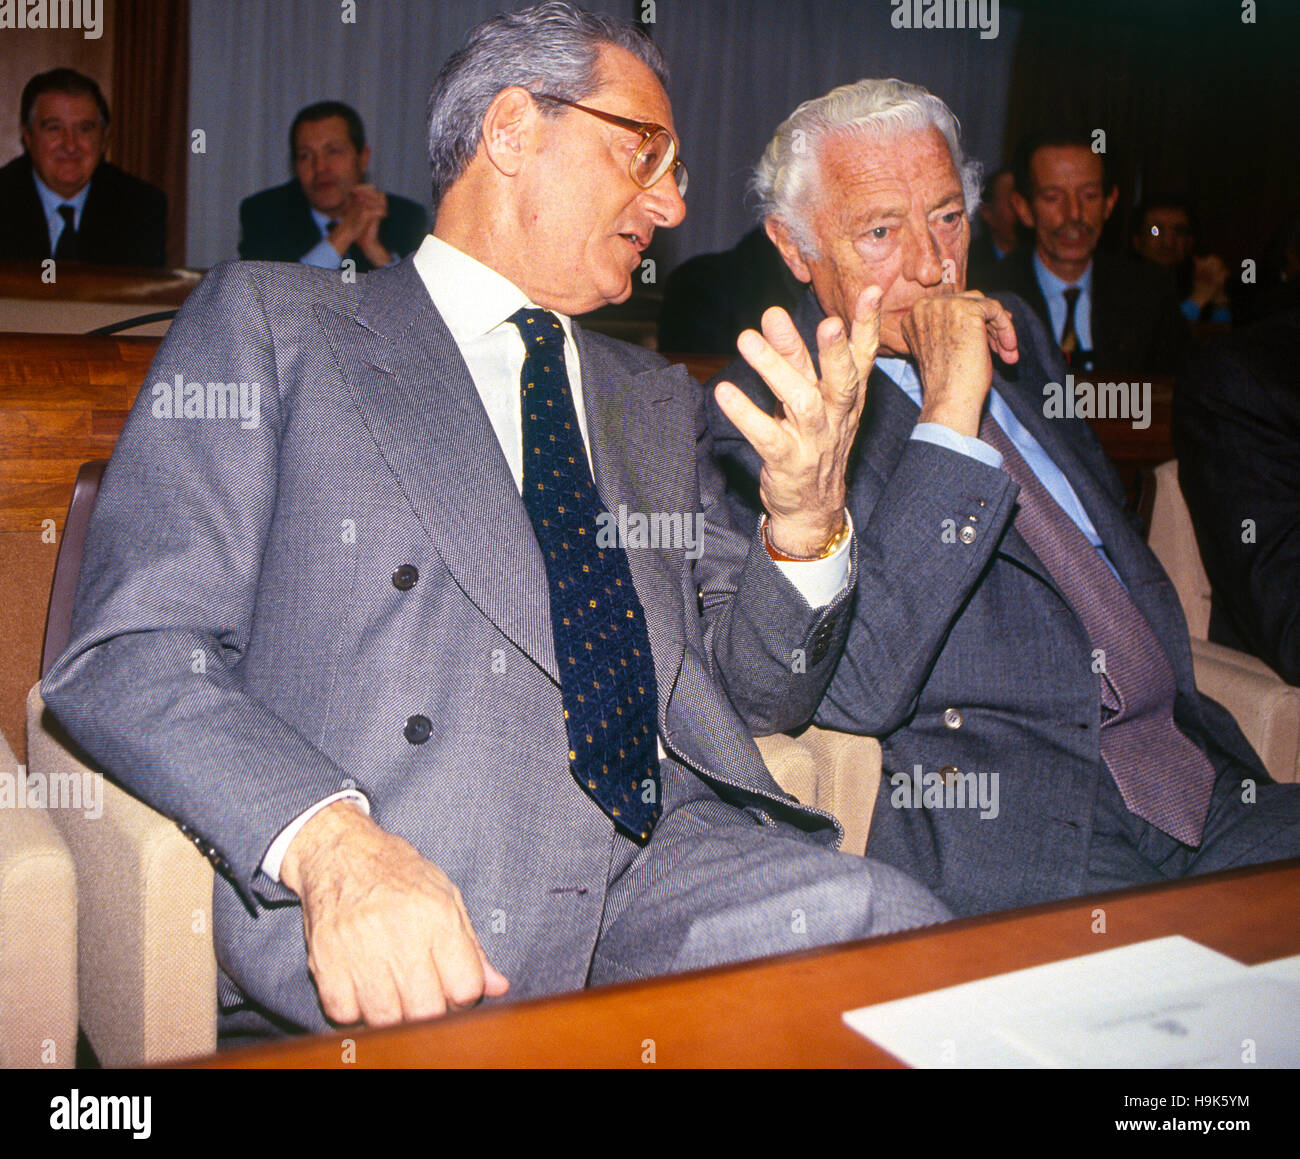 Giovanni Agnelli, said 'Gianni' and also known as the Lawyer (Turin, 12 March 1921 - Turin, Jan. 24, 2003), was an Italian entrepreneur and politician, principal shareholder and director of the FIAT at the summit, as well as a senator for life and Cesare Romiti ( in the days when he was president and CEO Fiat ) Stock Photo